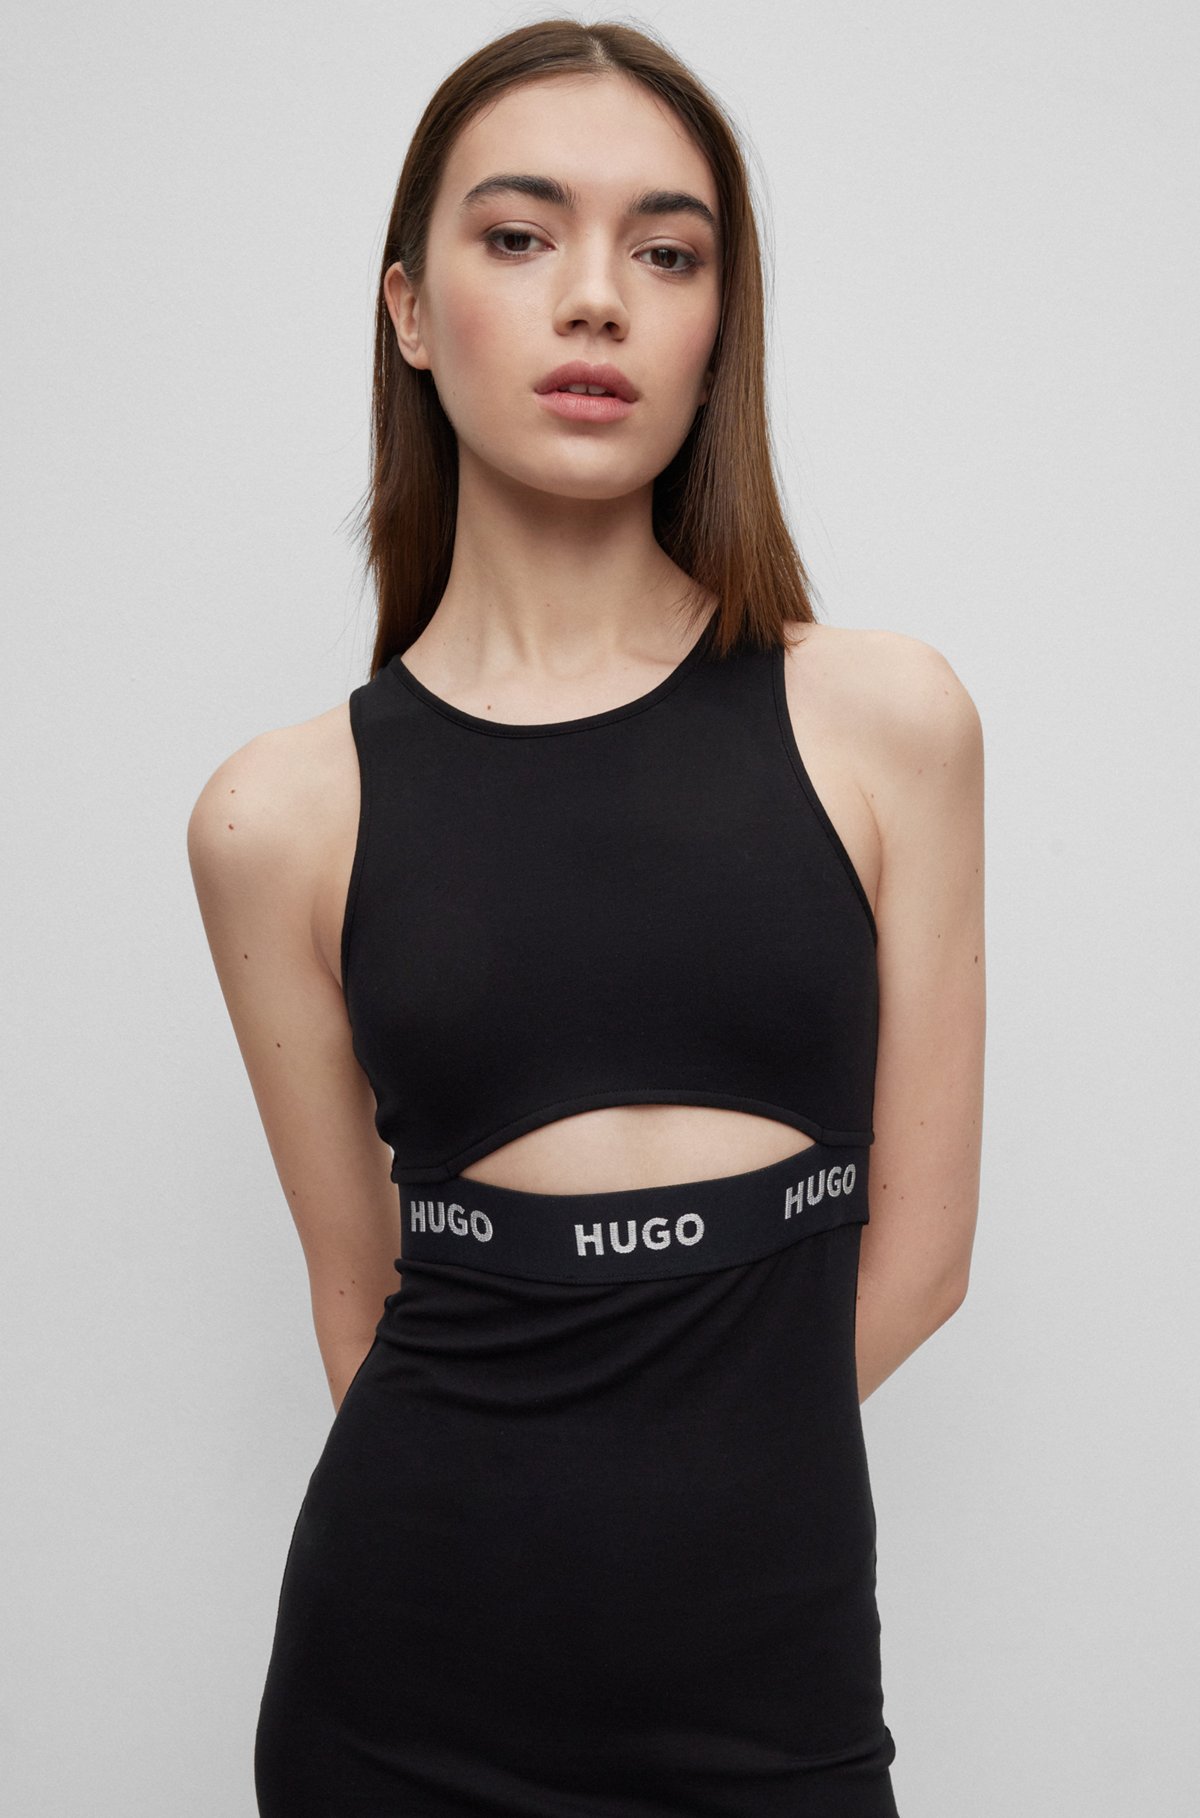 Stretch-cotton dress with cut-out and logo details, Black